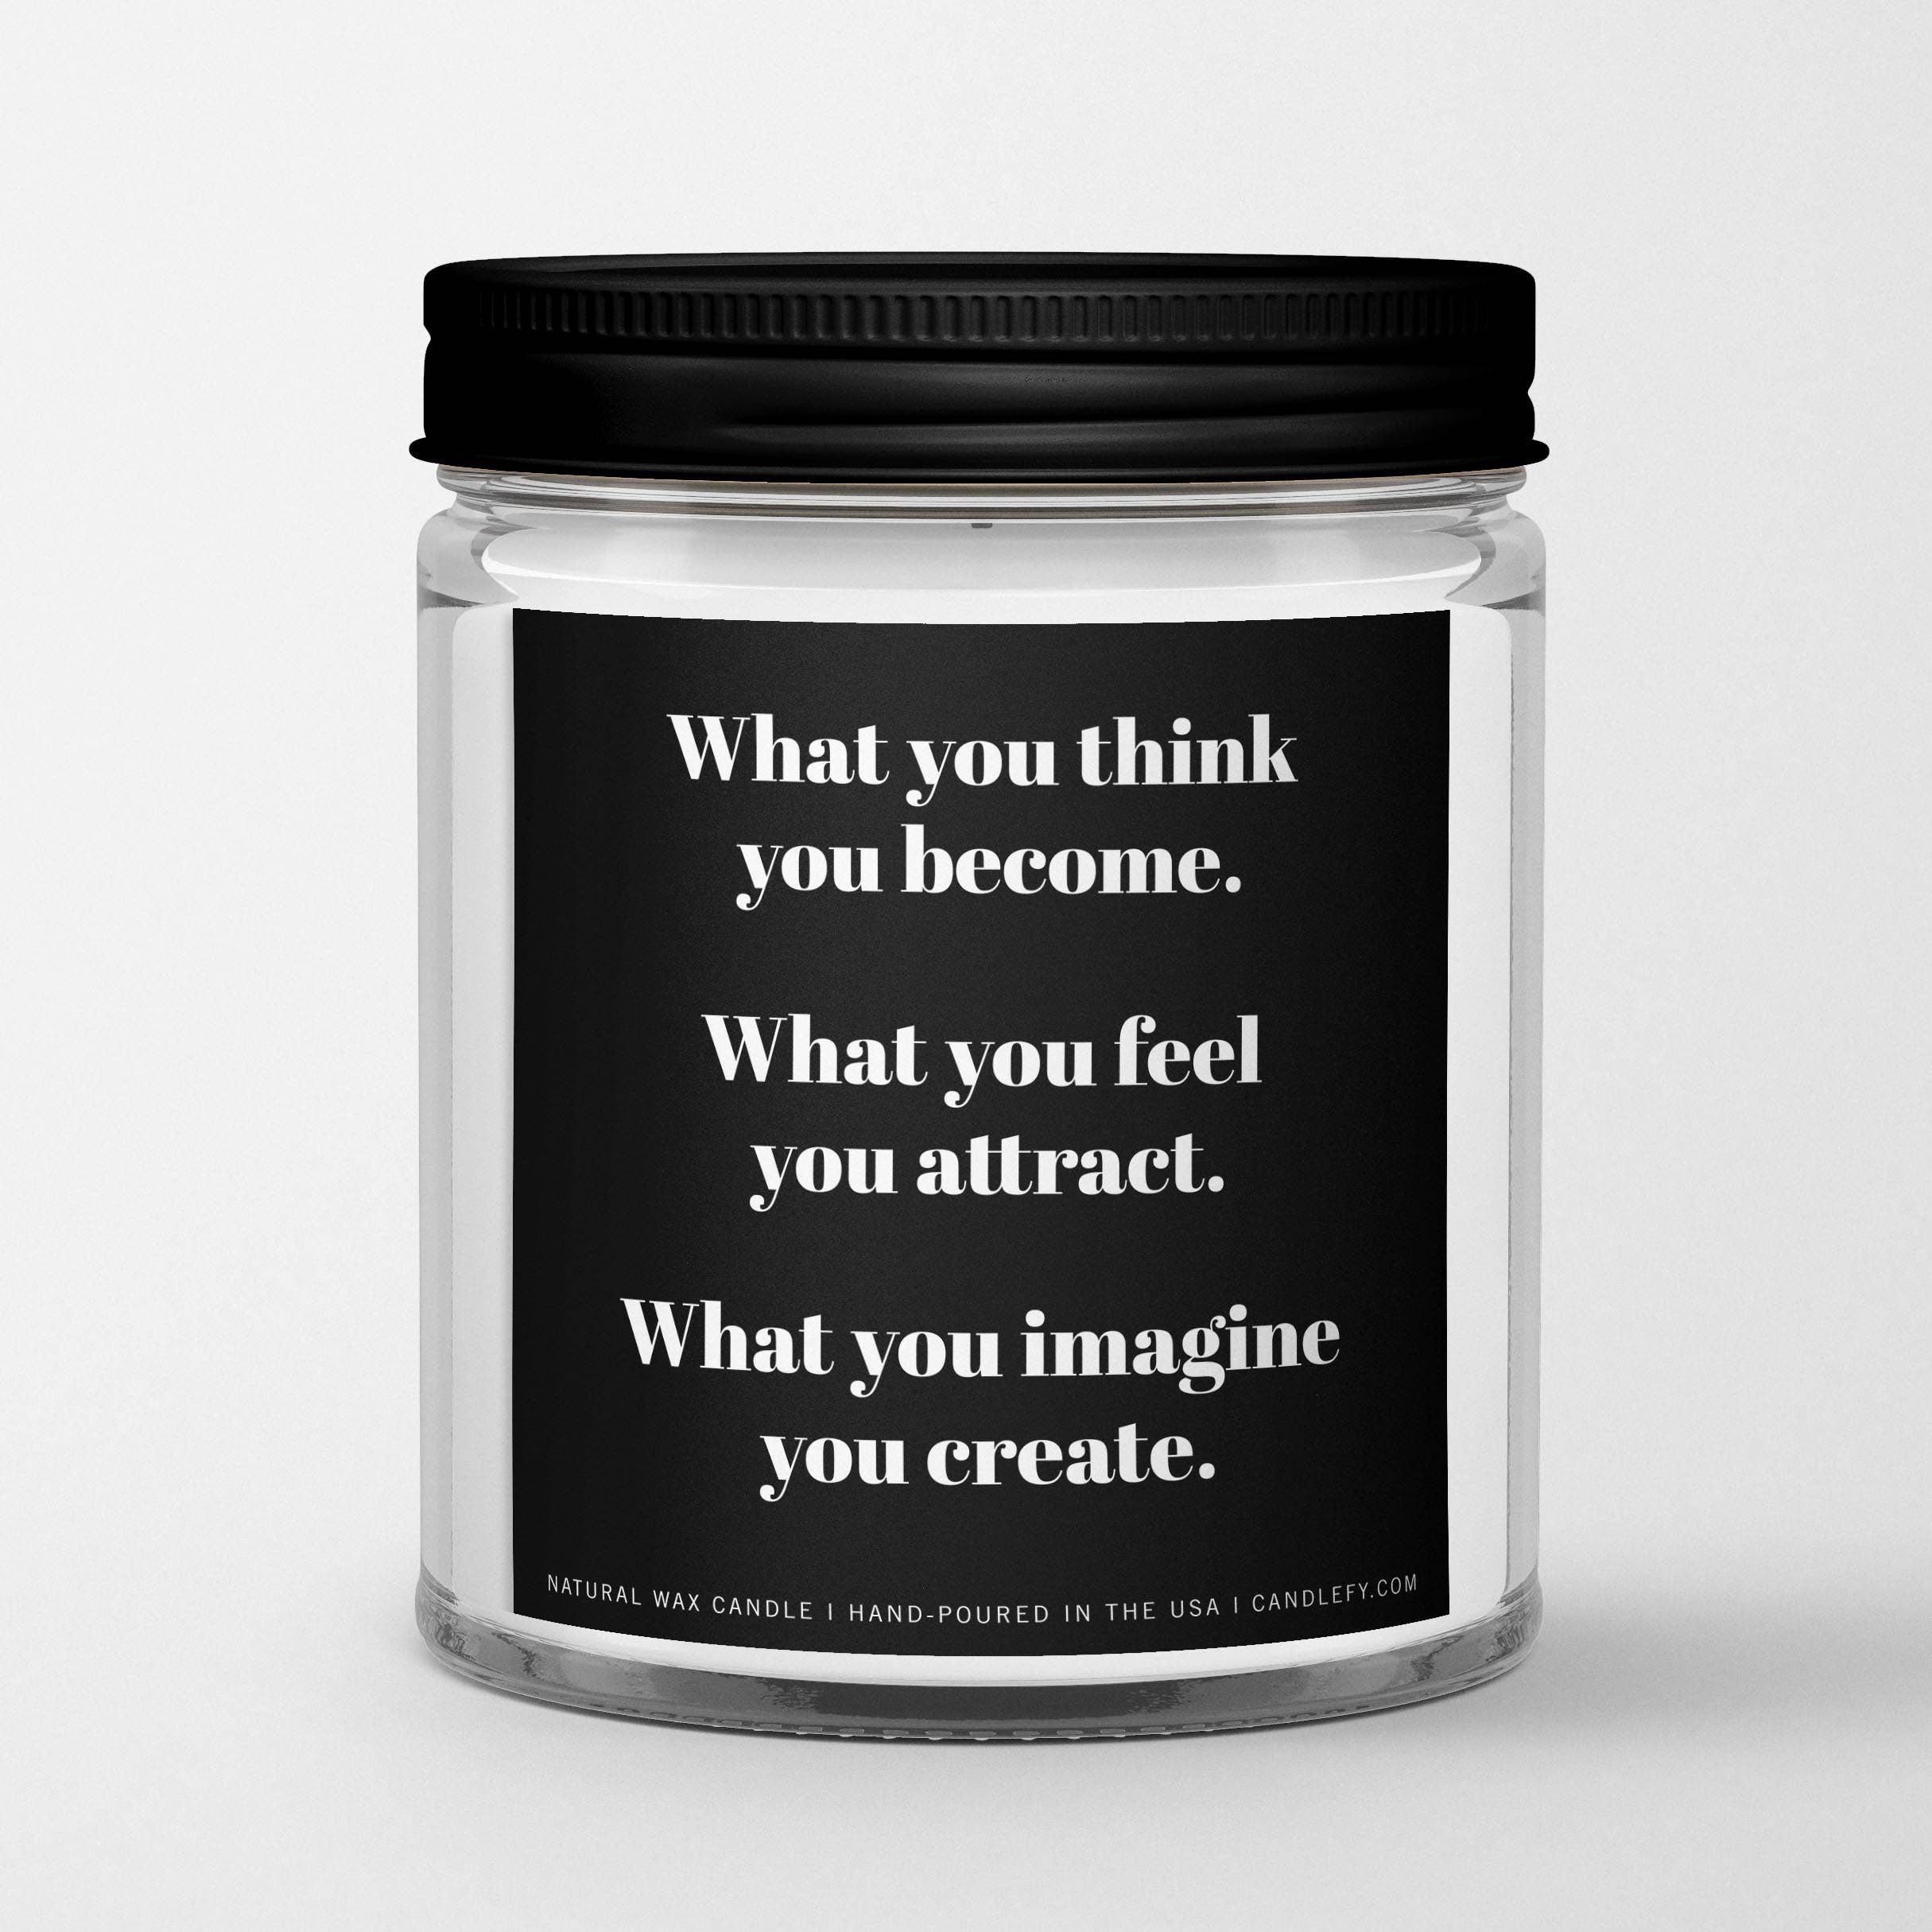 Candlefy - Scented Candle with Inspirational Quote "What you think you (7799001546979)